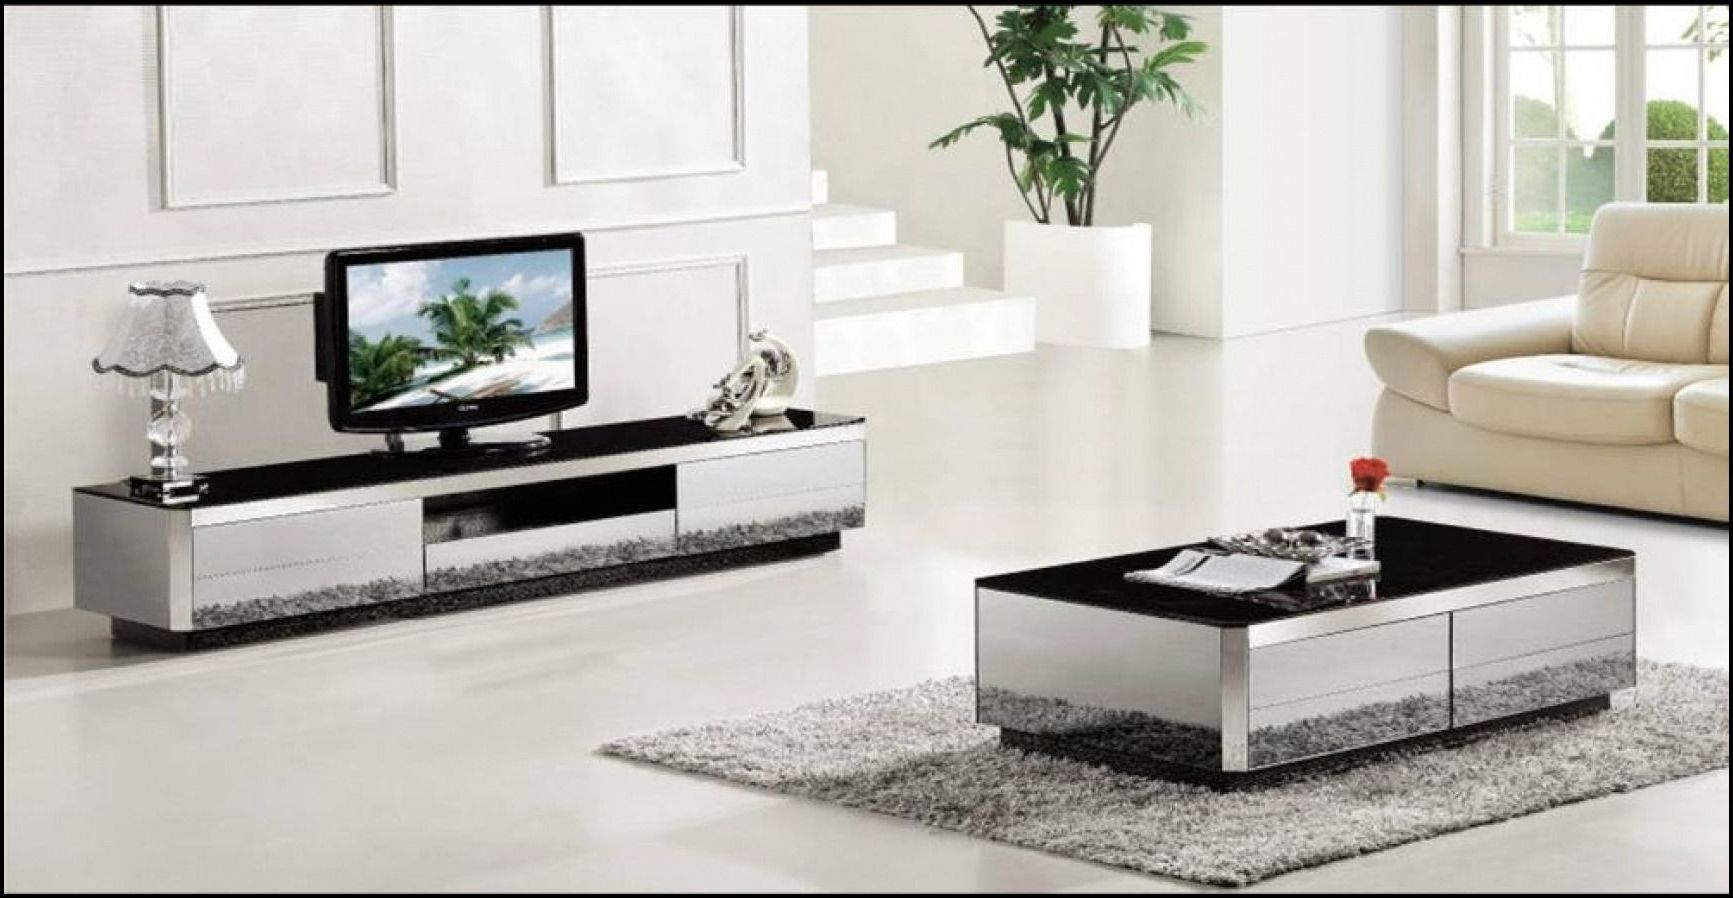 Well Known Tv Stand And Coffee Table Set,black Tv Stand And Coffee Table Set Regarding Tv Stand Coffee Table Sets (View 4 of 20)